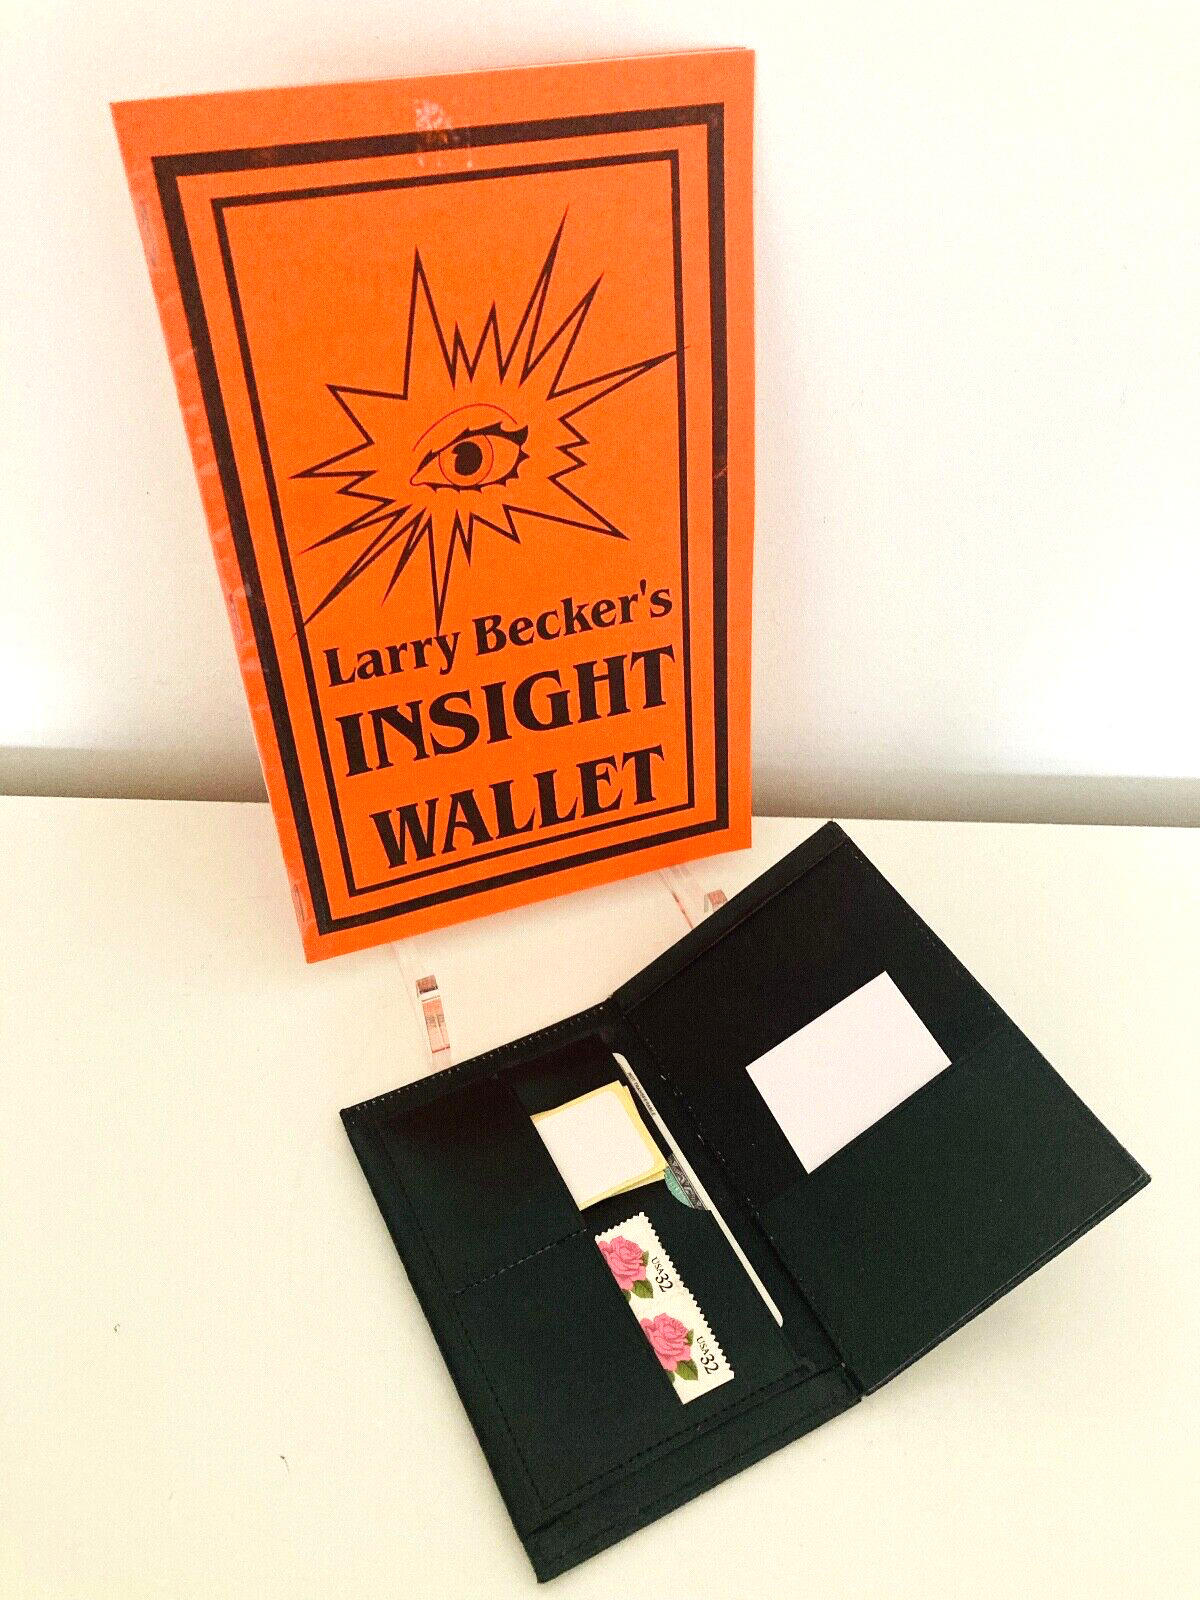 Larry Becker Insight Wallet Booklet and Wallet shown open